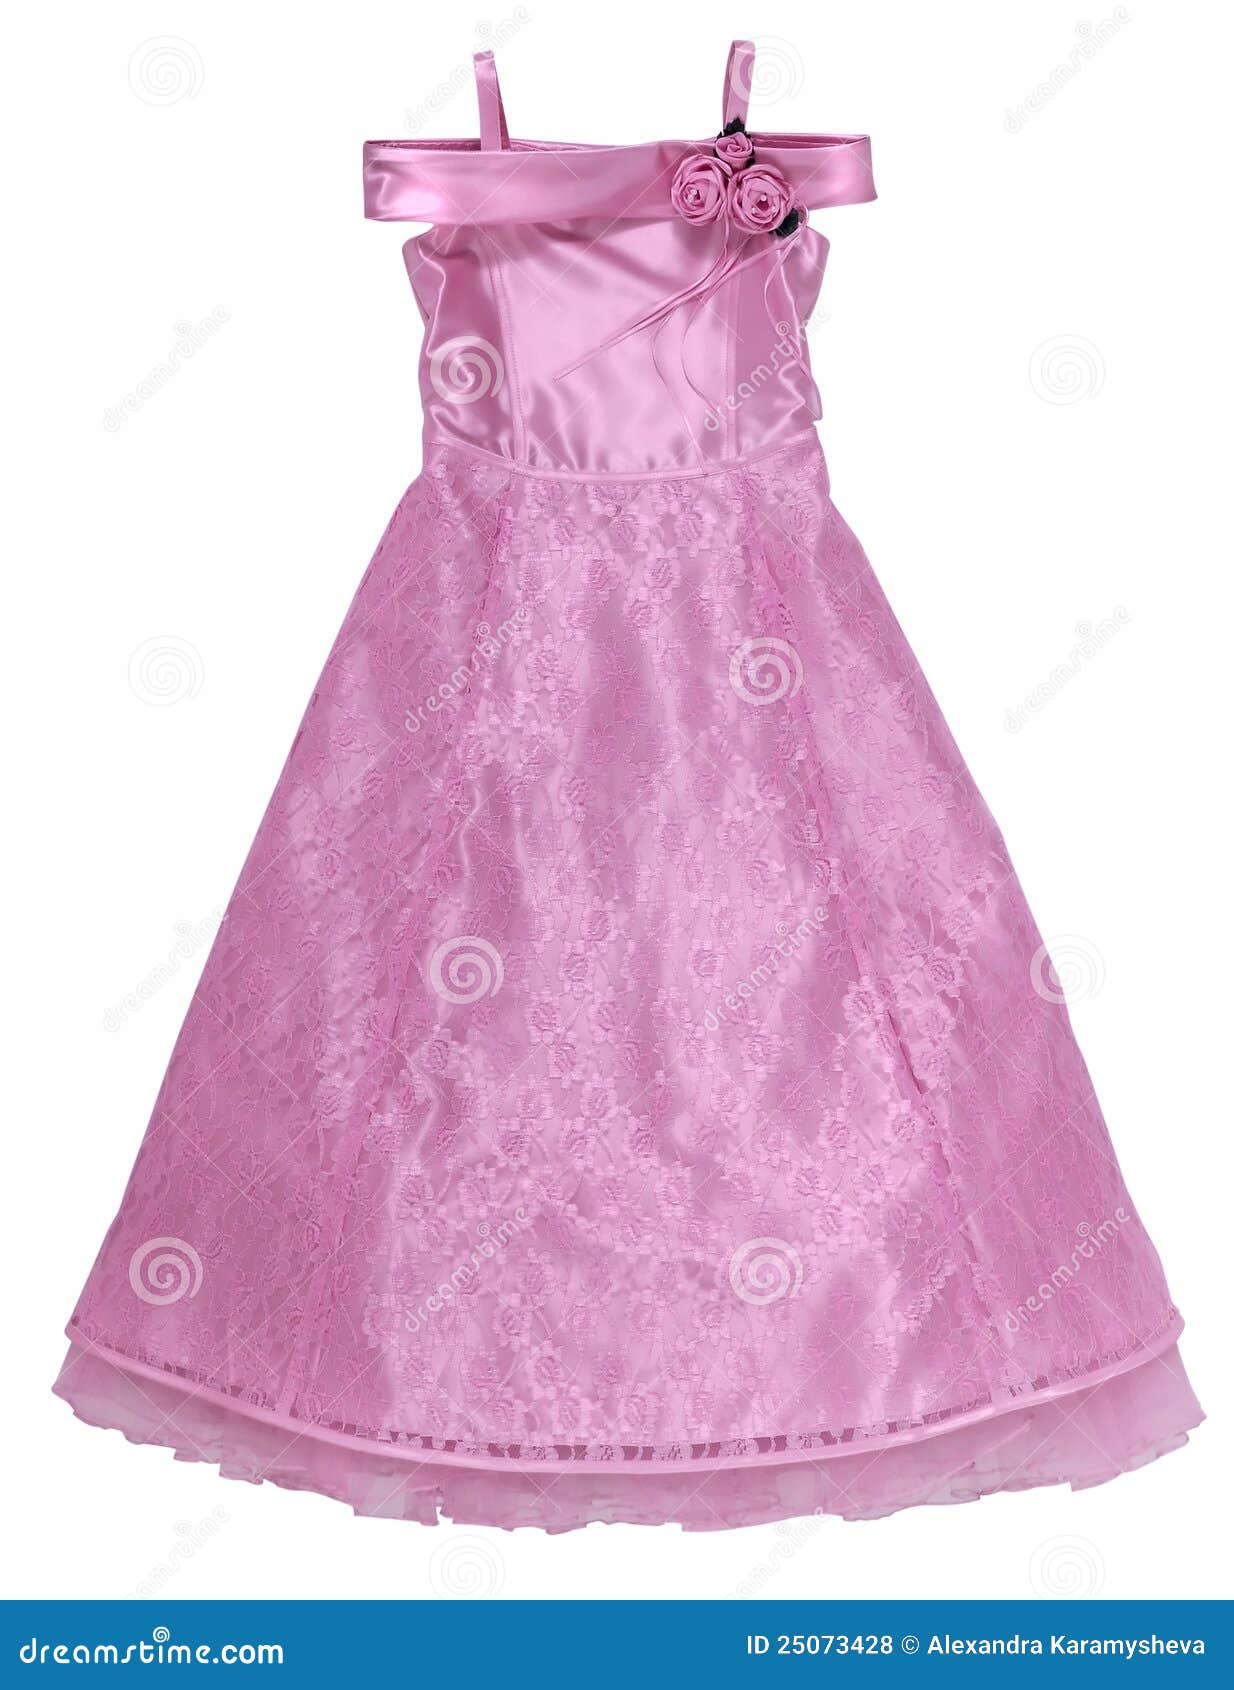 Pink lace dress stock photo. Image of floral, handmade - 25073428